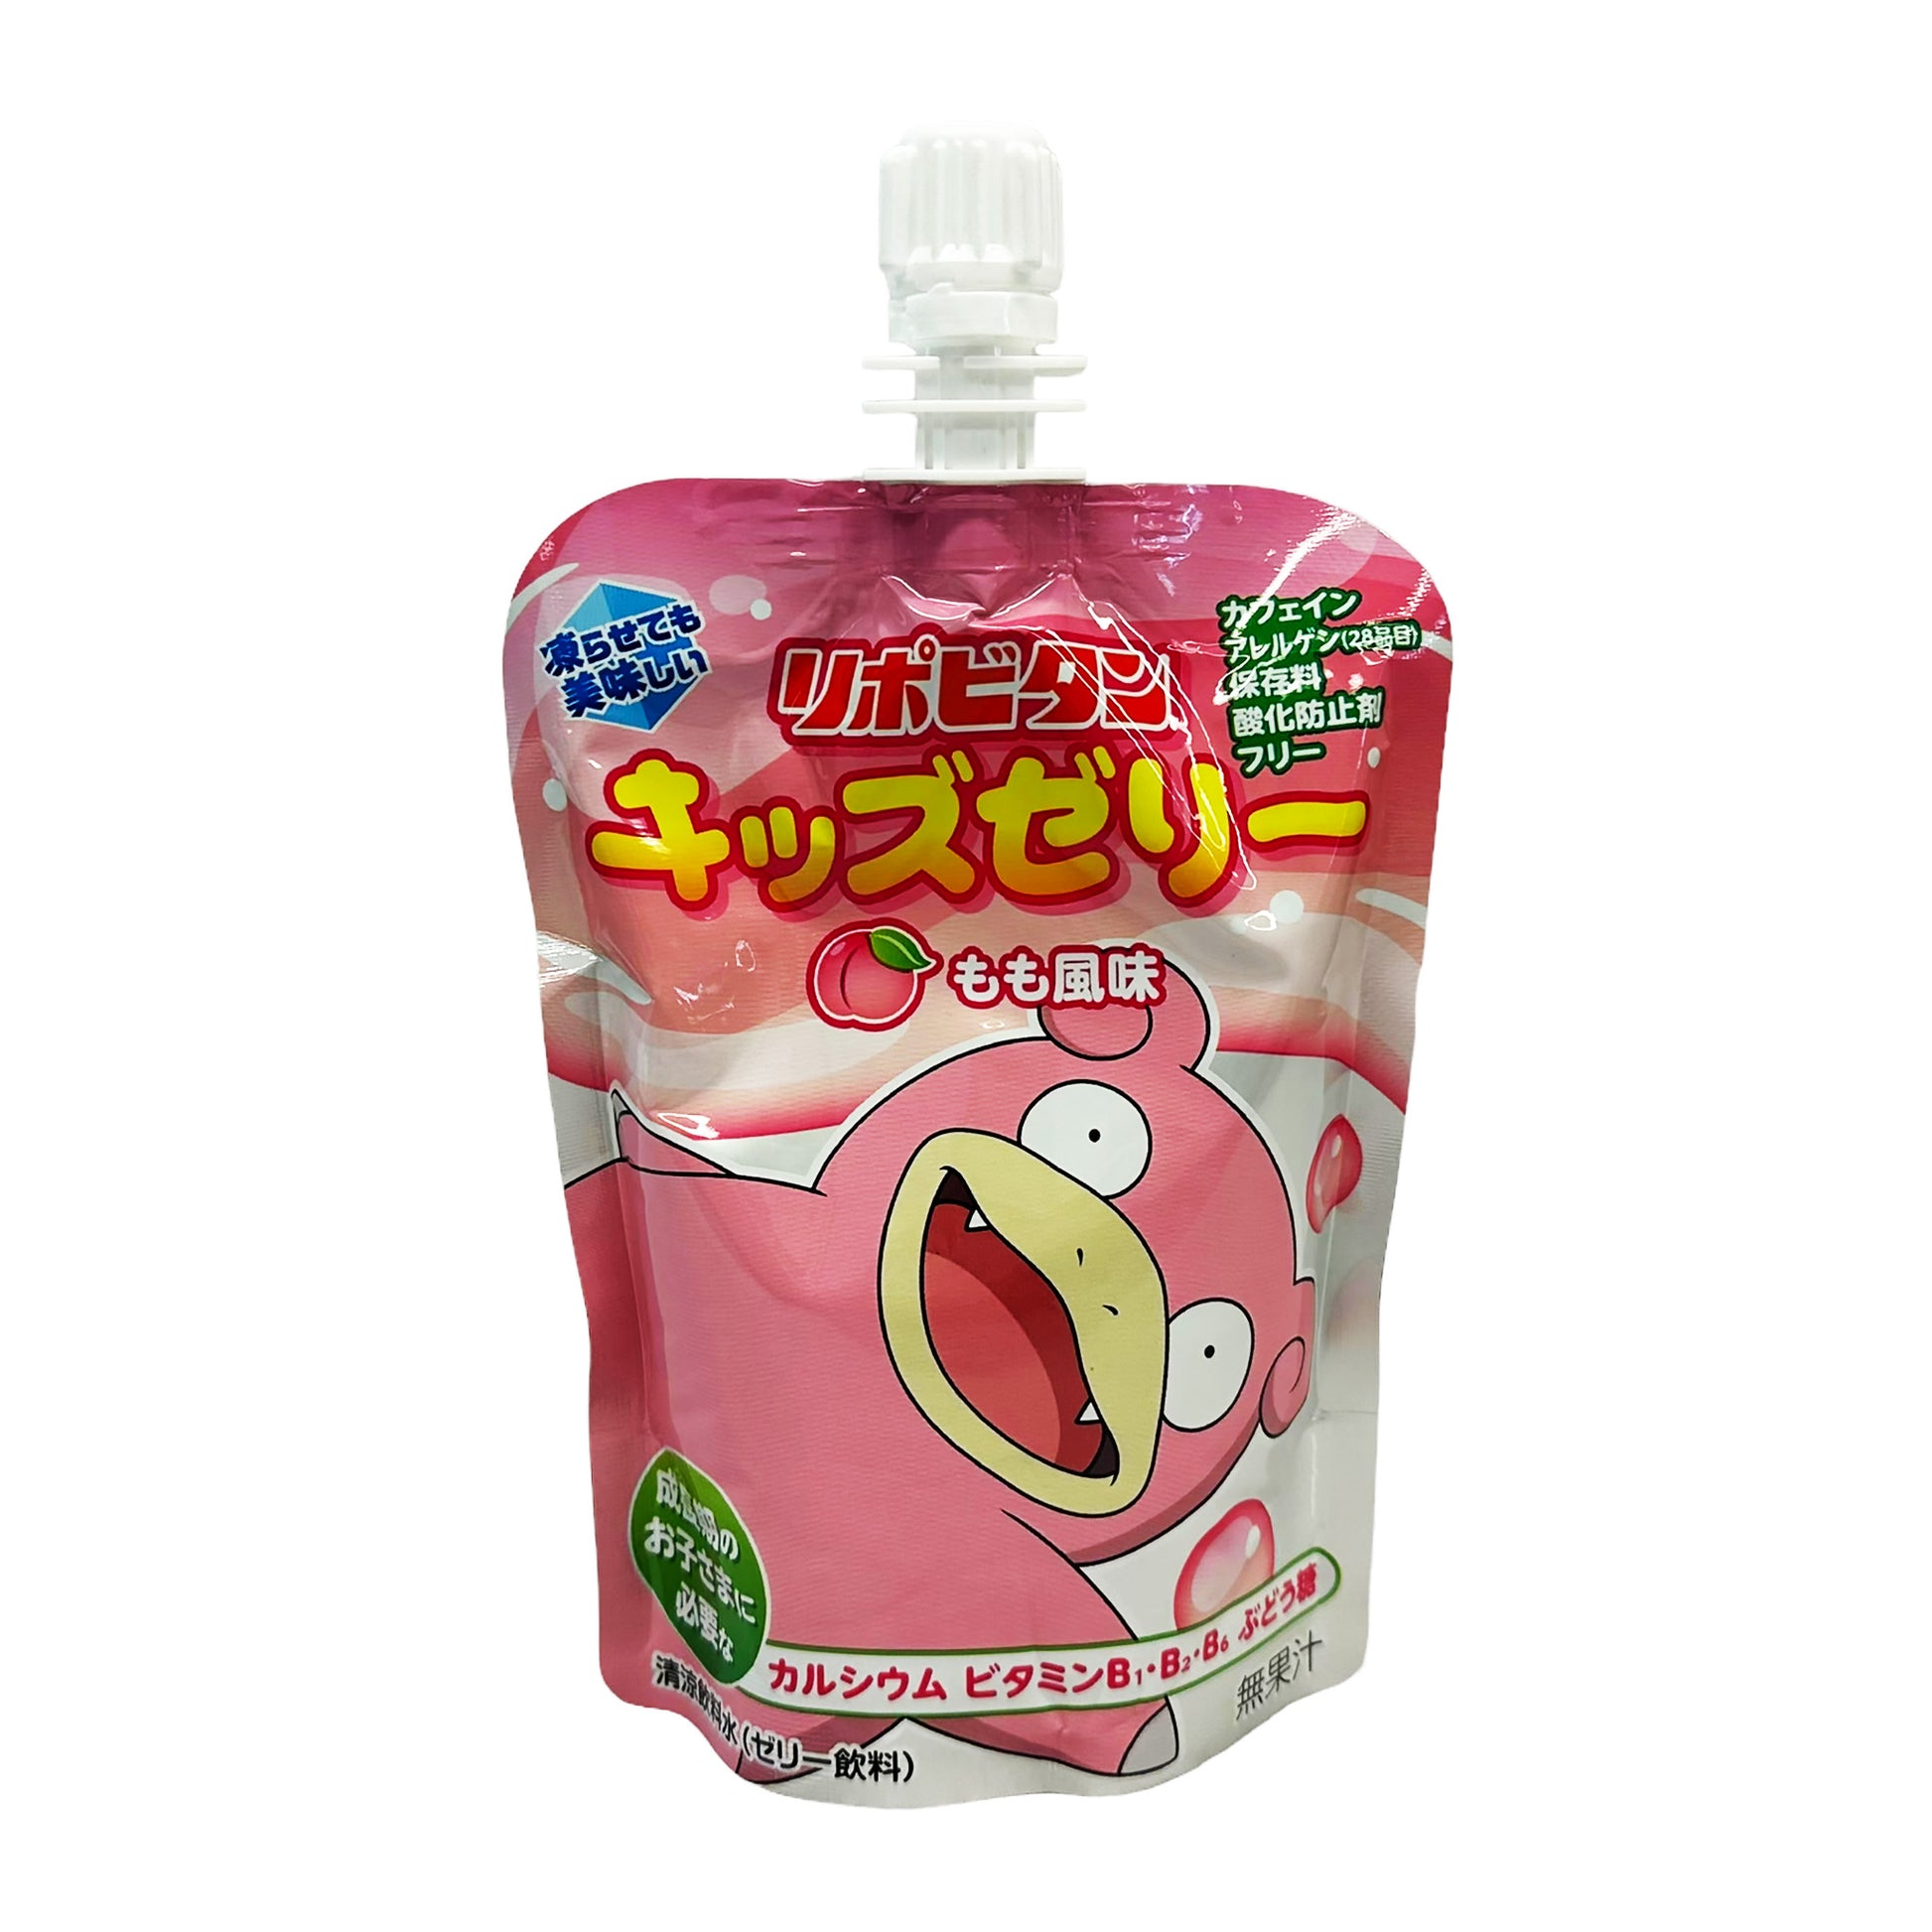 Front graphic image 4 of Taisho Pokemon Jelly Drink - Peach 4.4oz (125g)